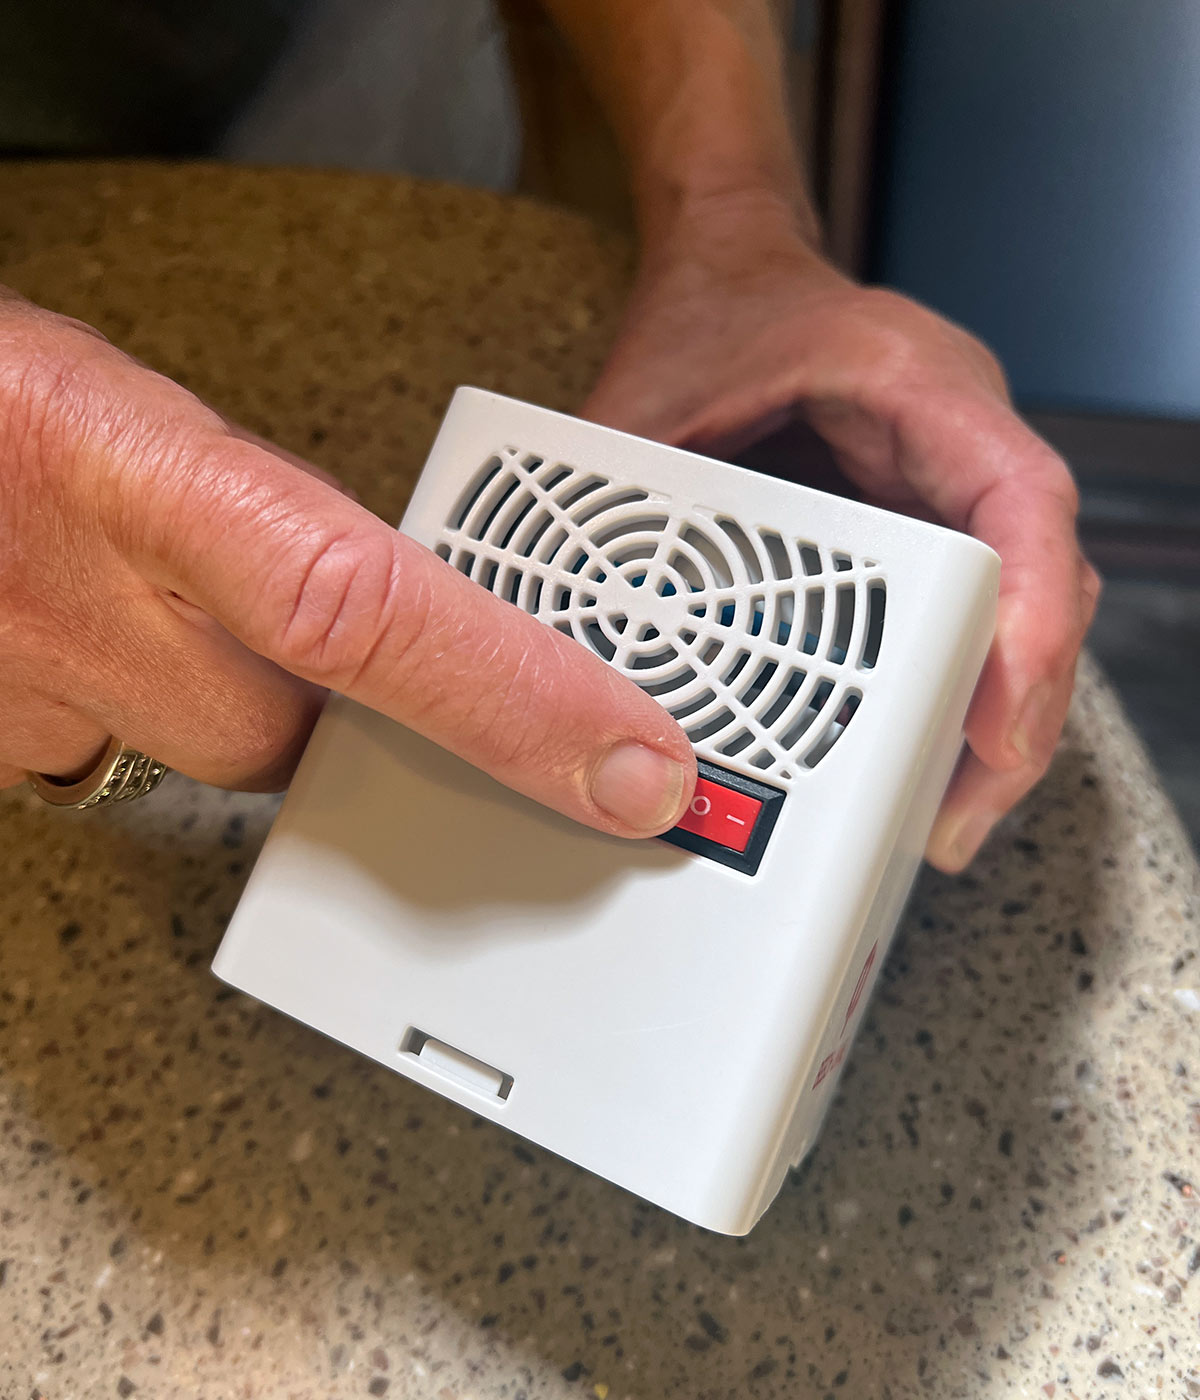 close view of the Fridge Fan as a finger points to the red power button on one side